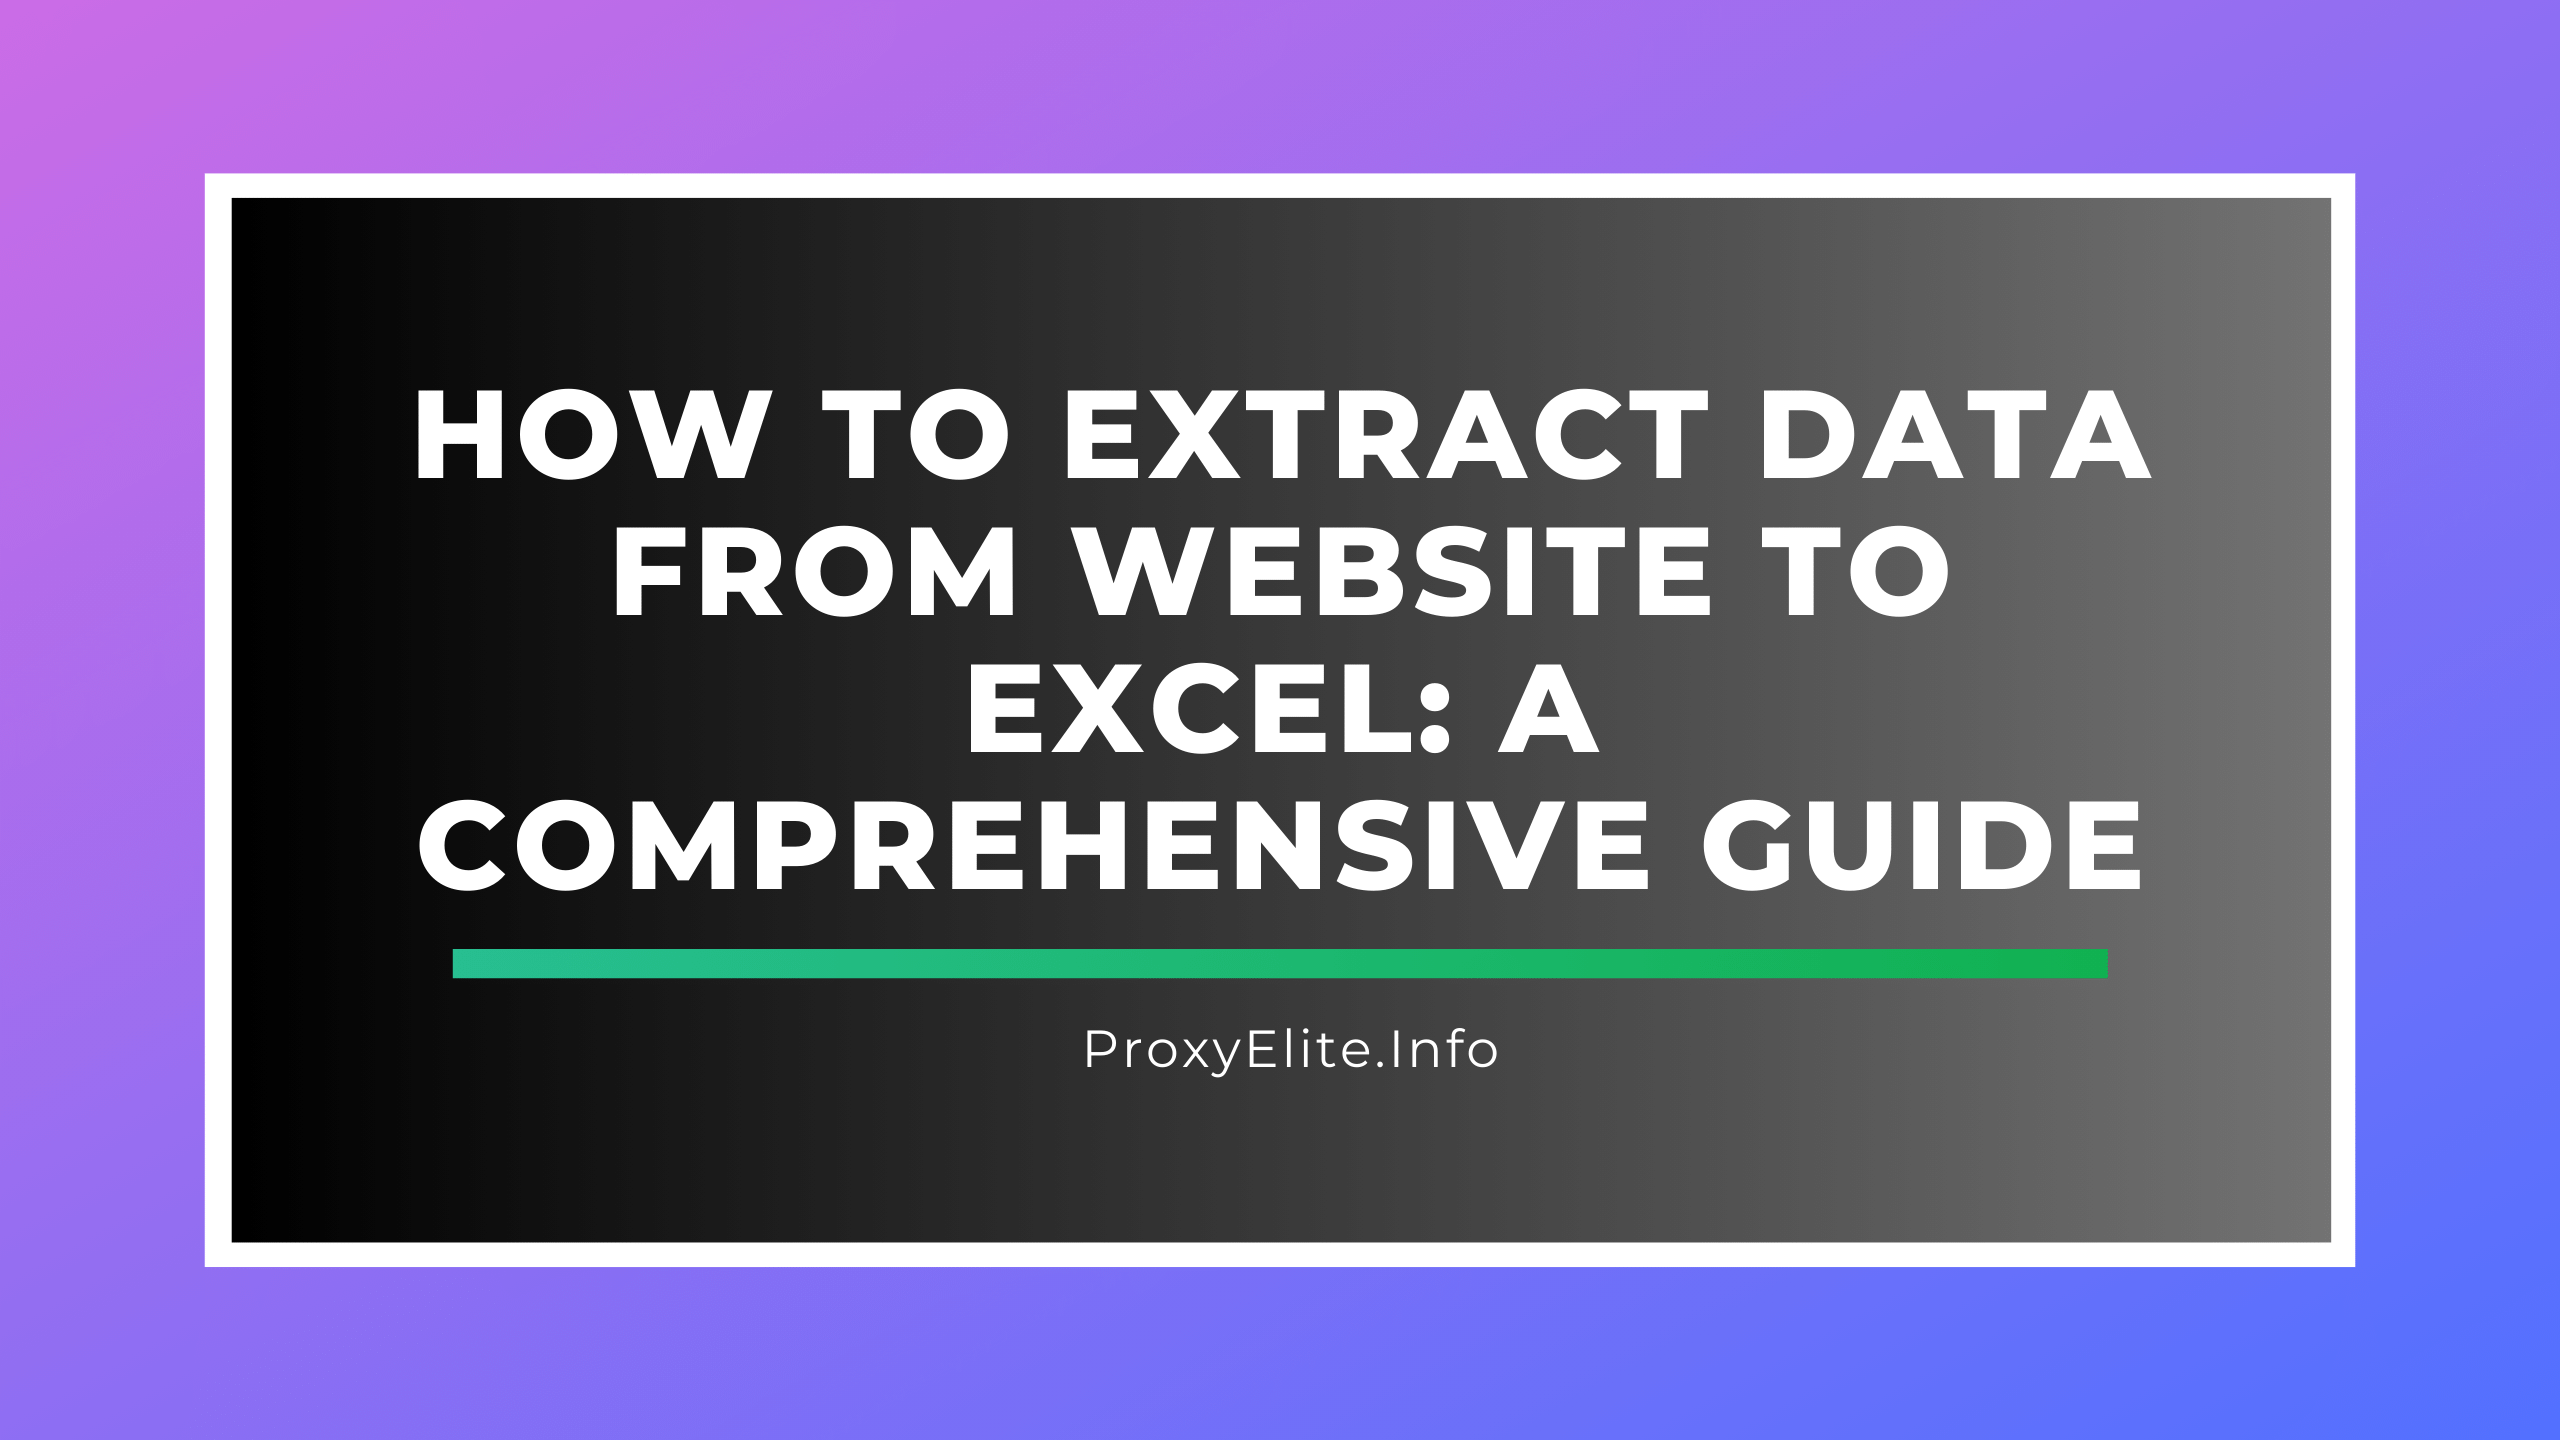 How to Extract Data from Website to Excel: A Comprehensive Guide